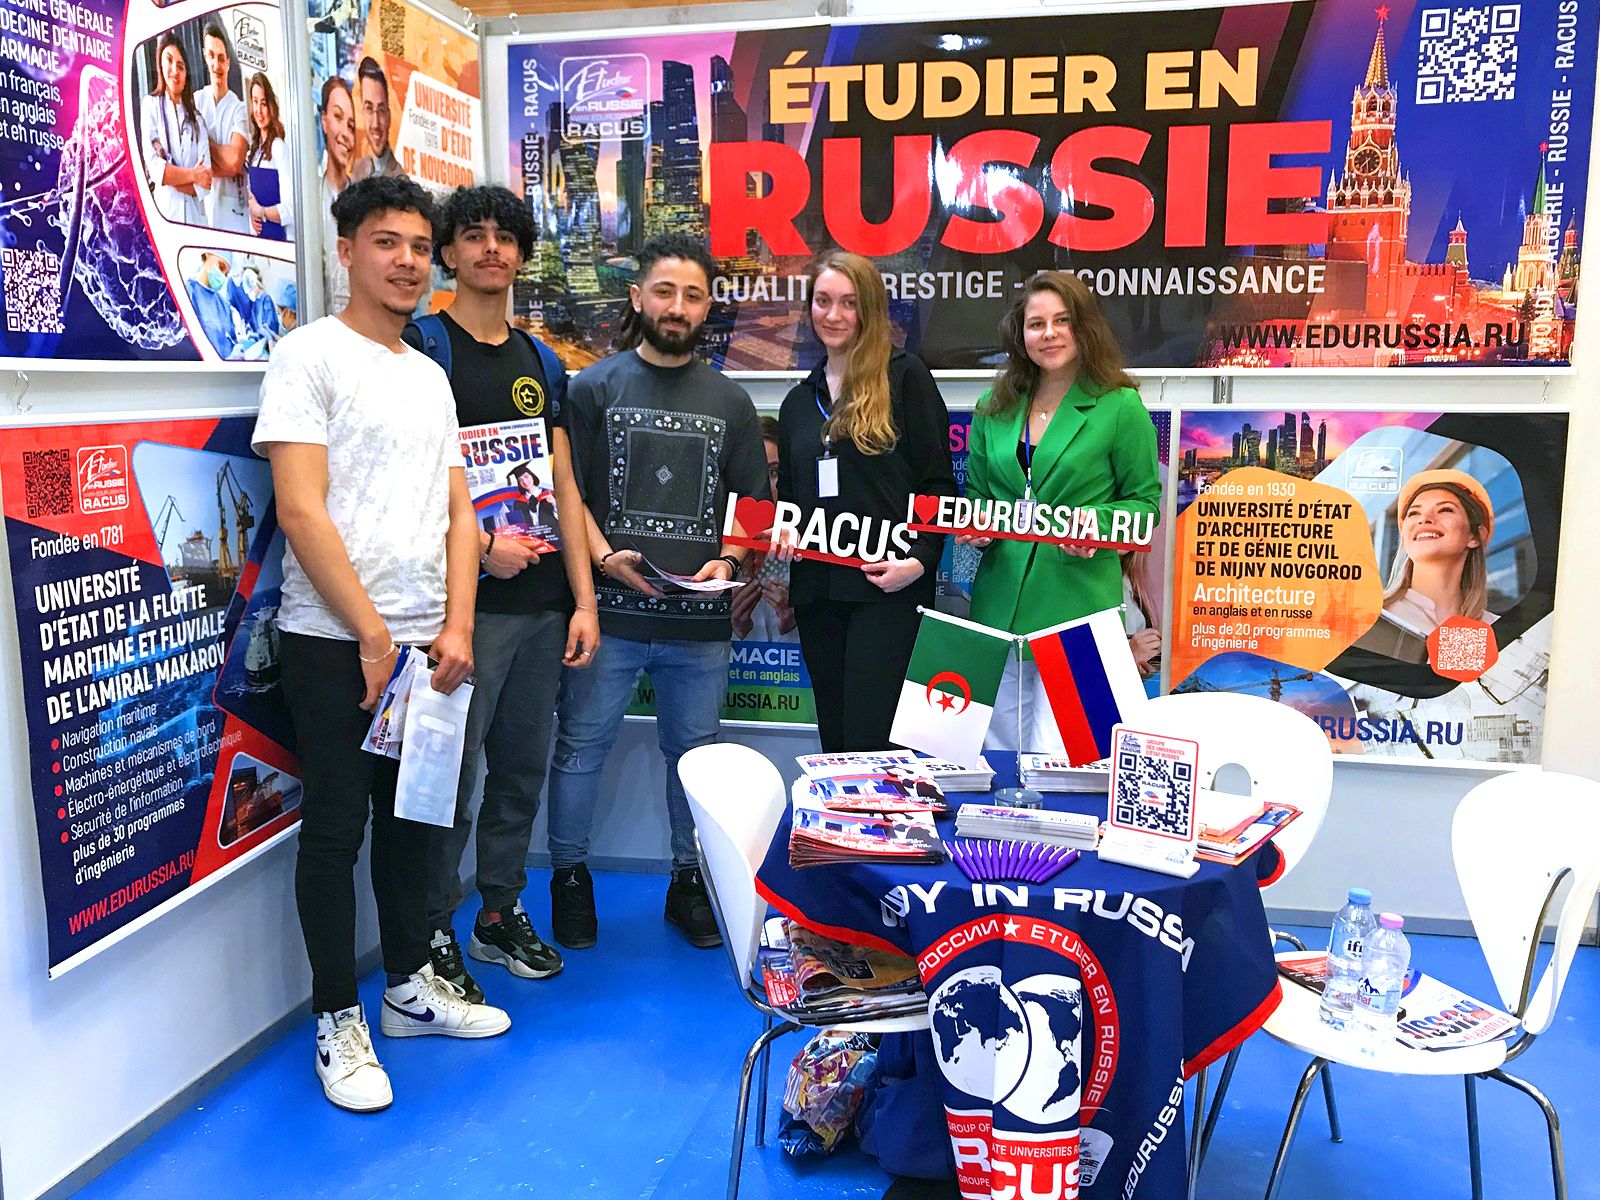 Join the best! See you at the next exhibitions! On May 2-7, an exhibition tour "Open Days of Russian Higher Education" will be held in 4 large cities in the east of the country.